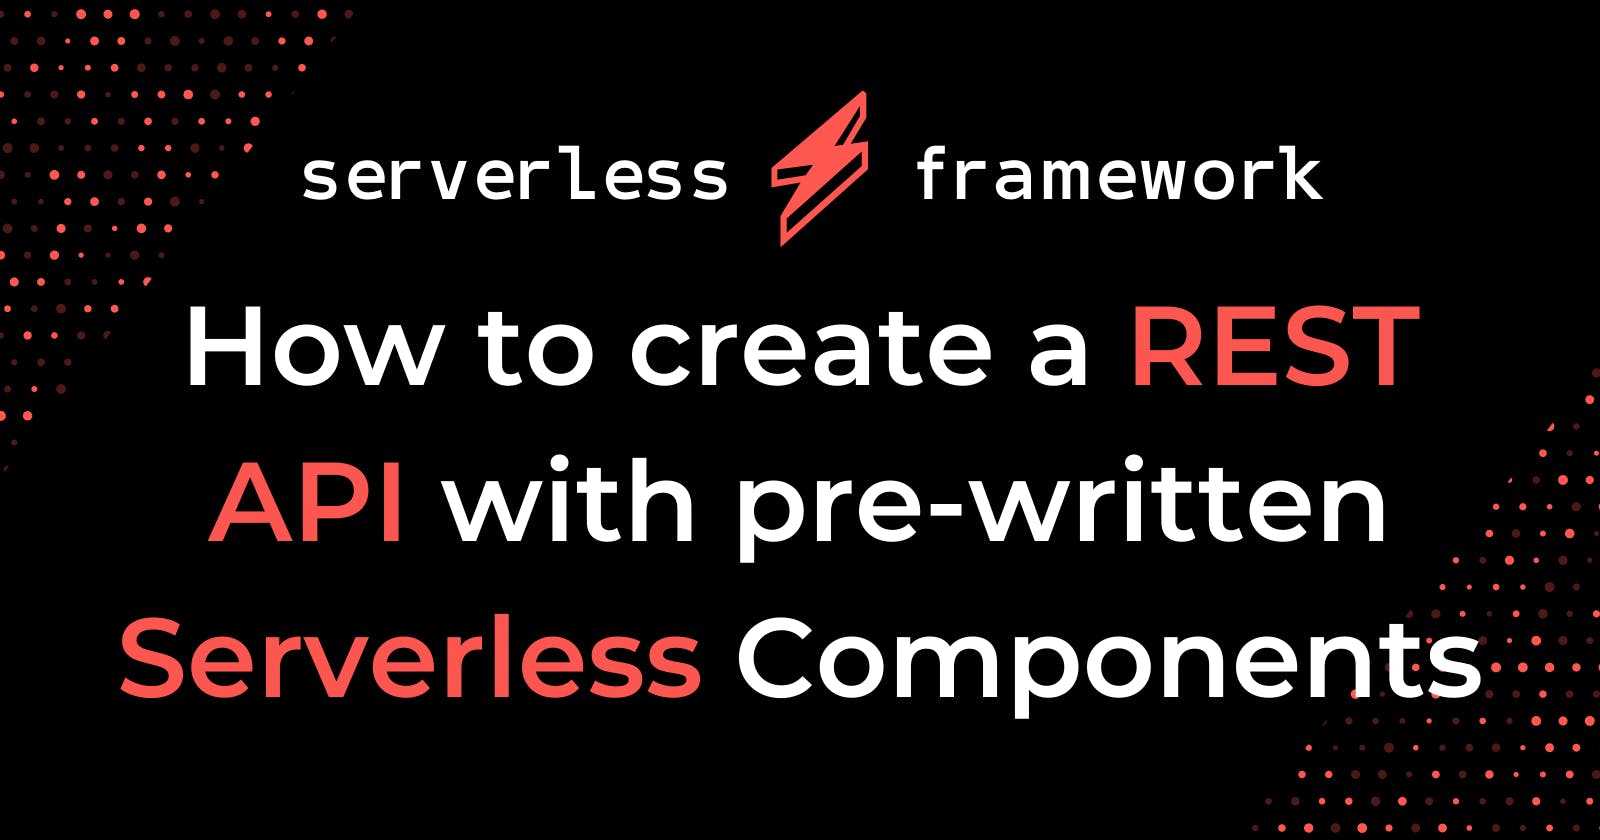 How to create a REST API with pre-written Serverless Components